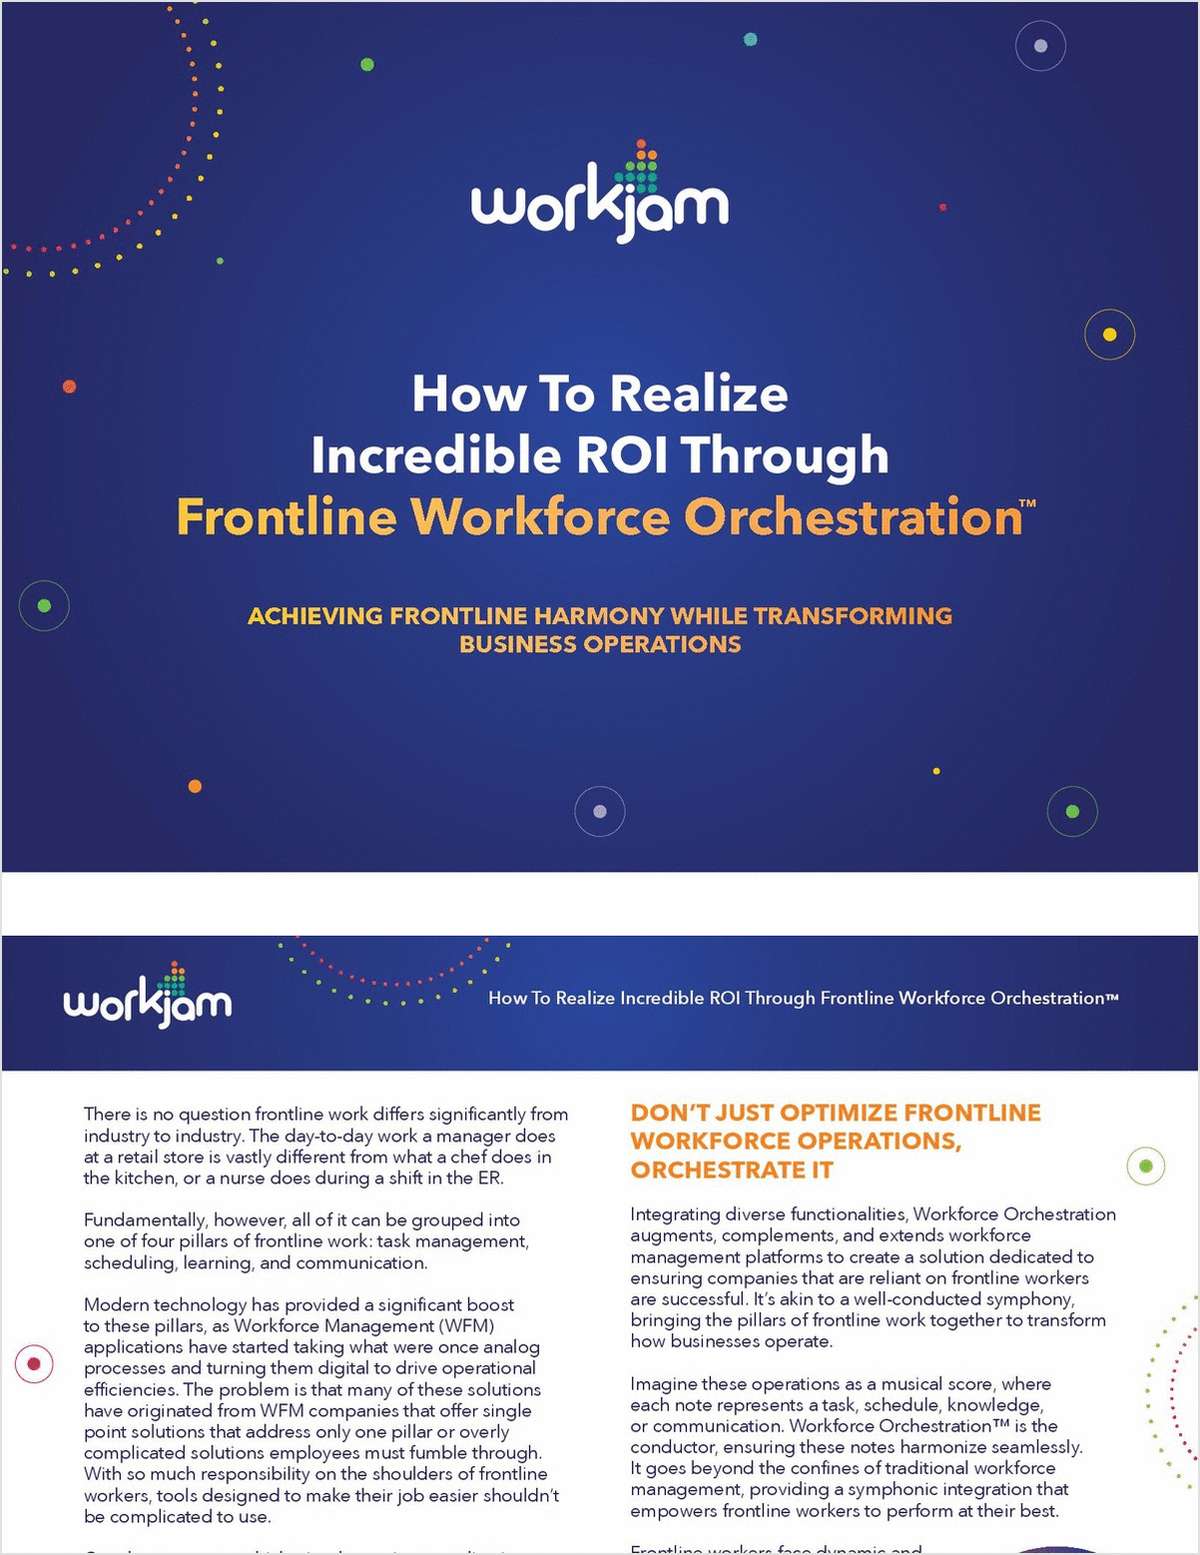 How To Realize Incredible ROI Through Frontline Workforce Orchestration™